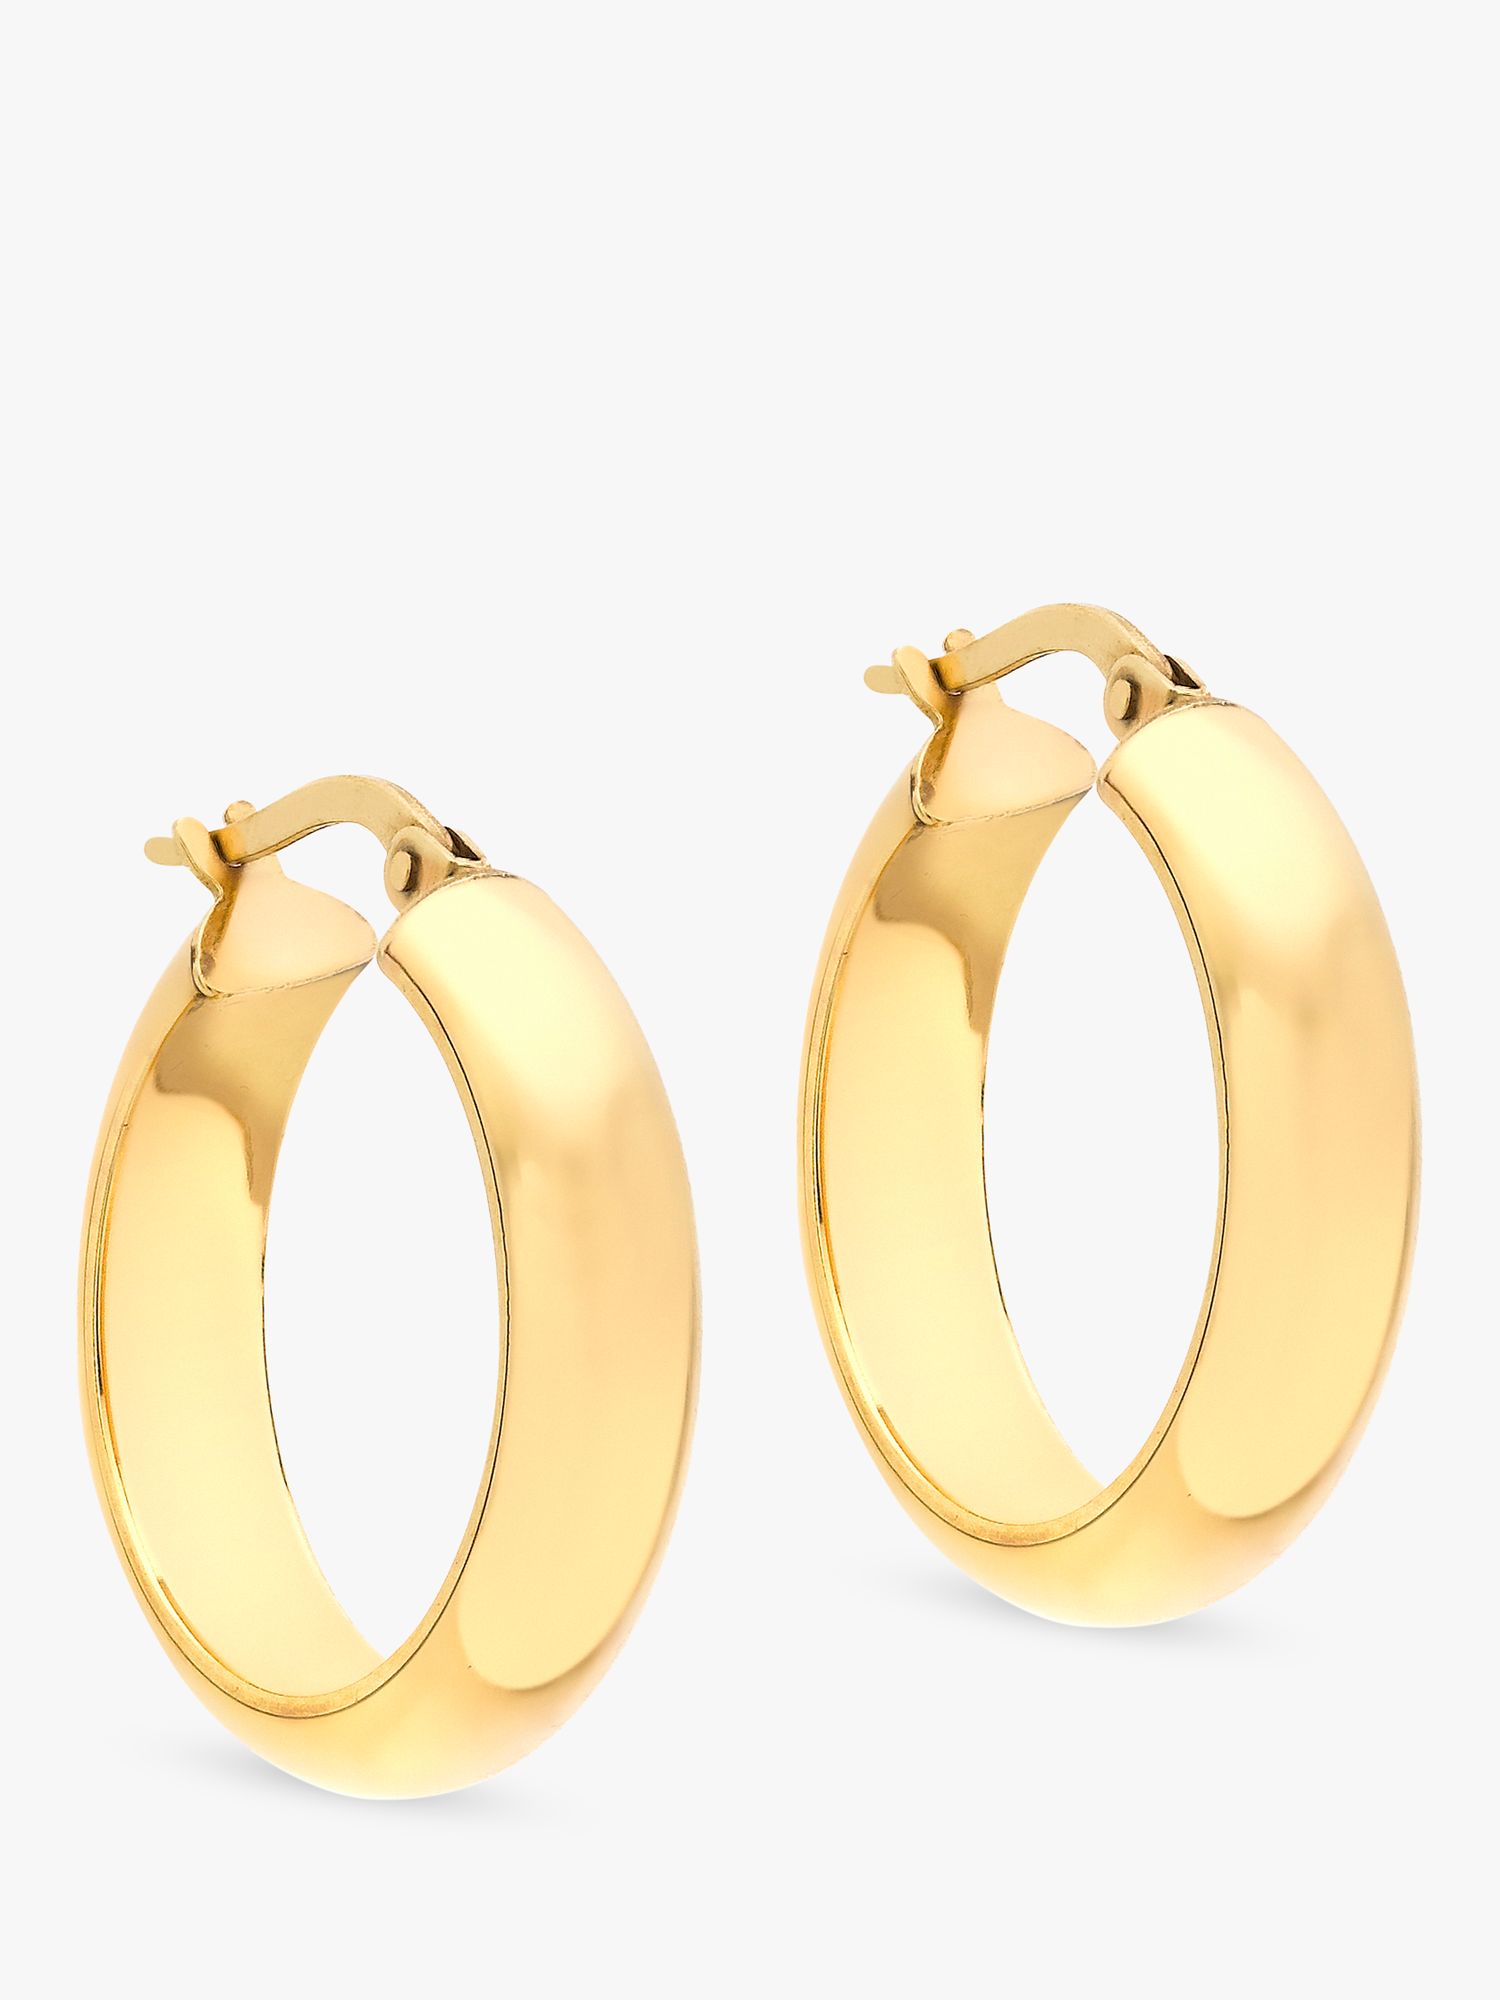 Buy IBB 9ct Yellow Gold Large Creole Hoop Earrings, Gold Online at johnlewis.com